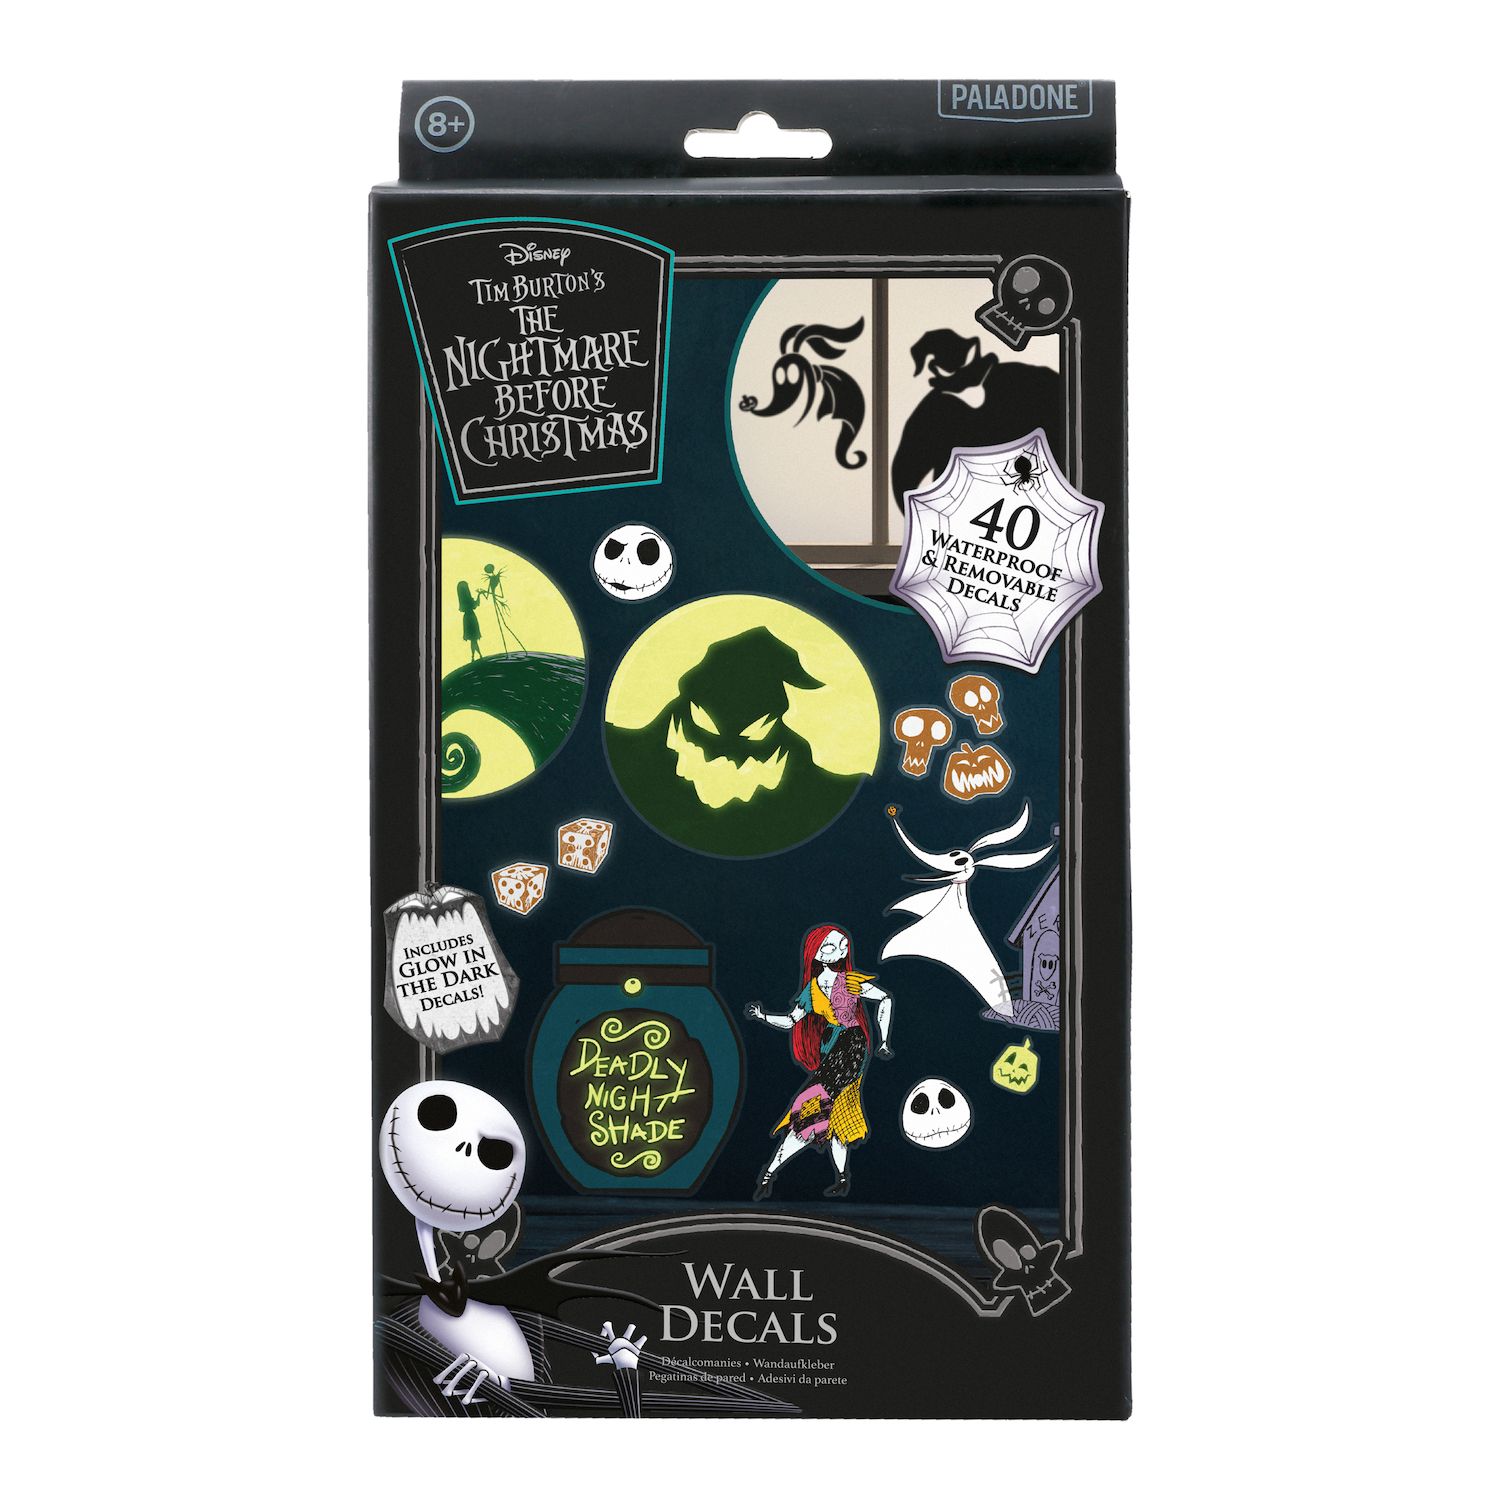 Disney's The Nightmare Before Christmas 300 pc. Holiday Puzzle by Ceaco